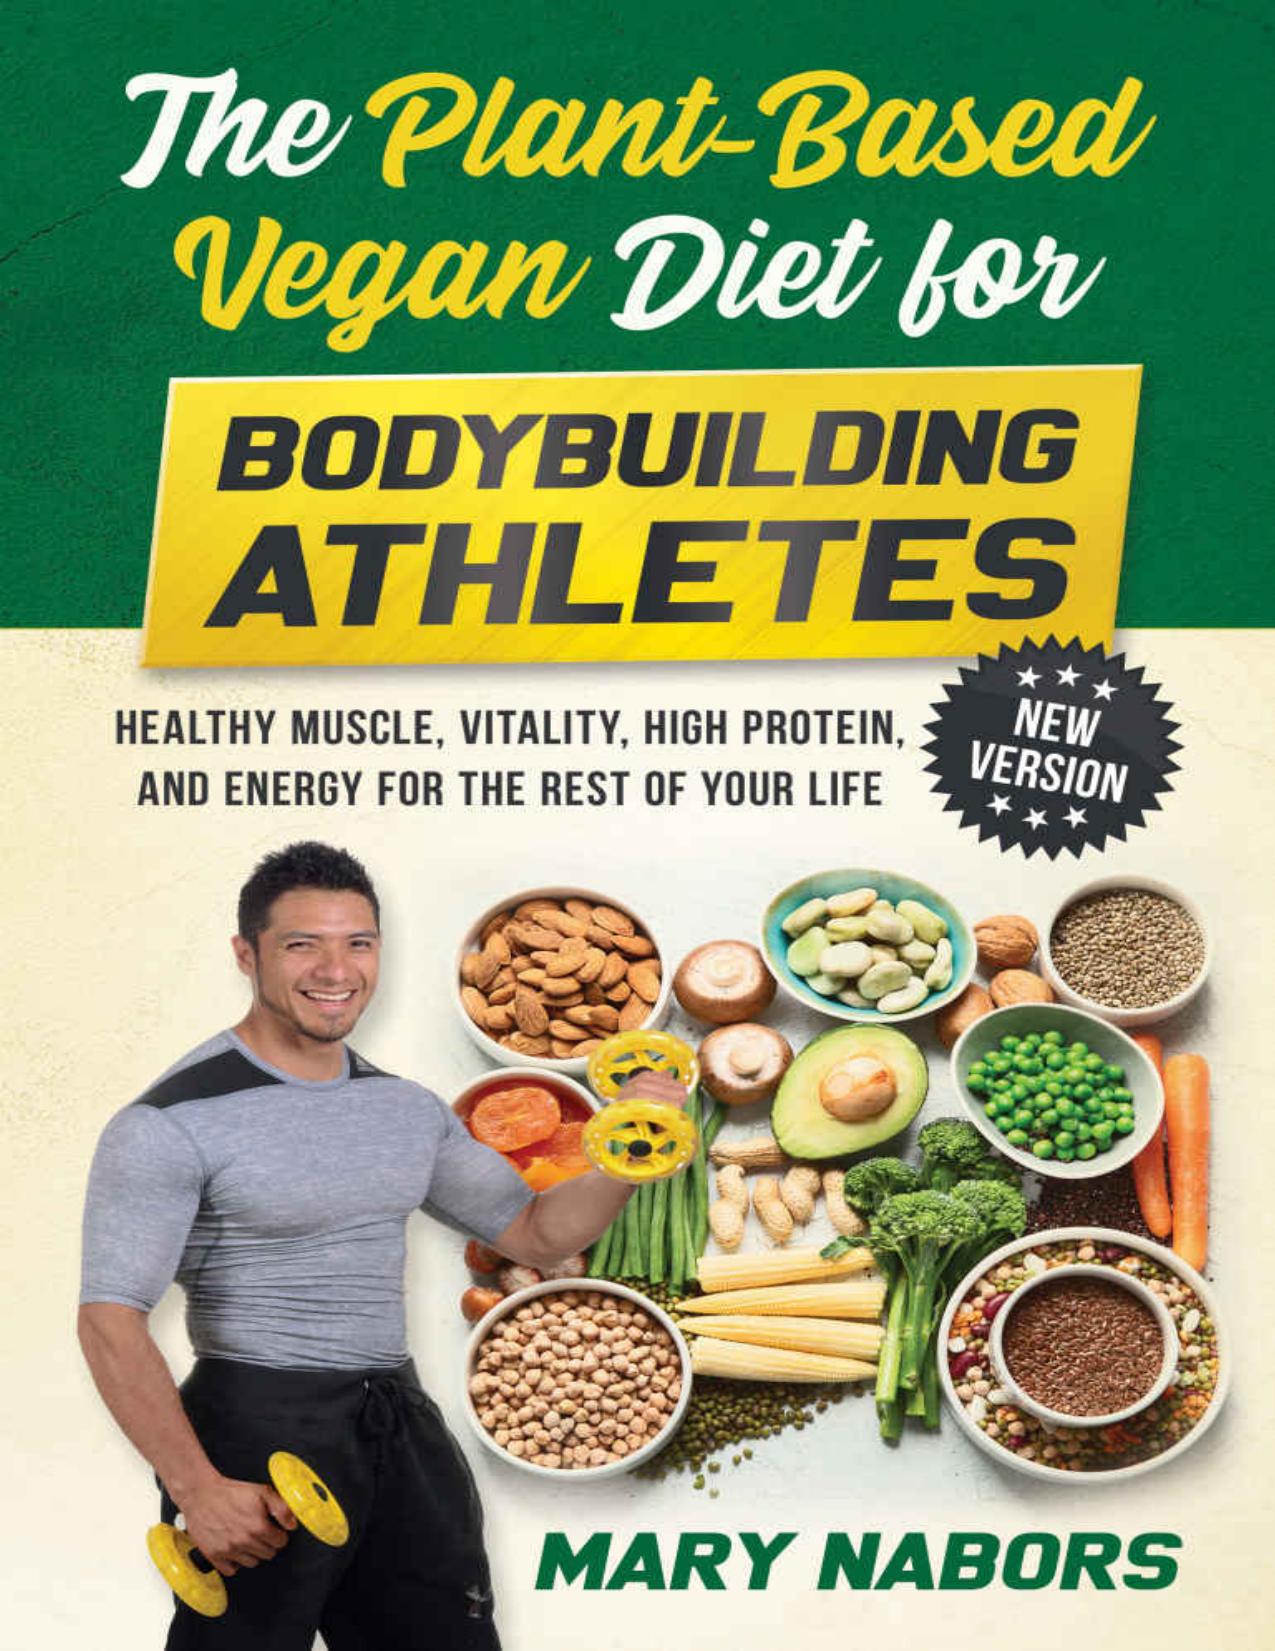 The Plant-Based Vegan Diet for Bodybuilding Athletes (NEW VERSION): Healthy Muscle, Vitality, High Protein, and Energy for the Rest of your Life by Mary Nabors